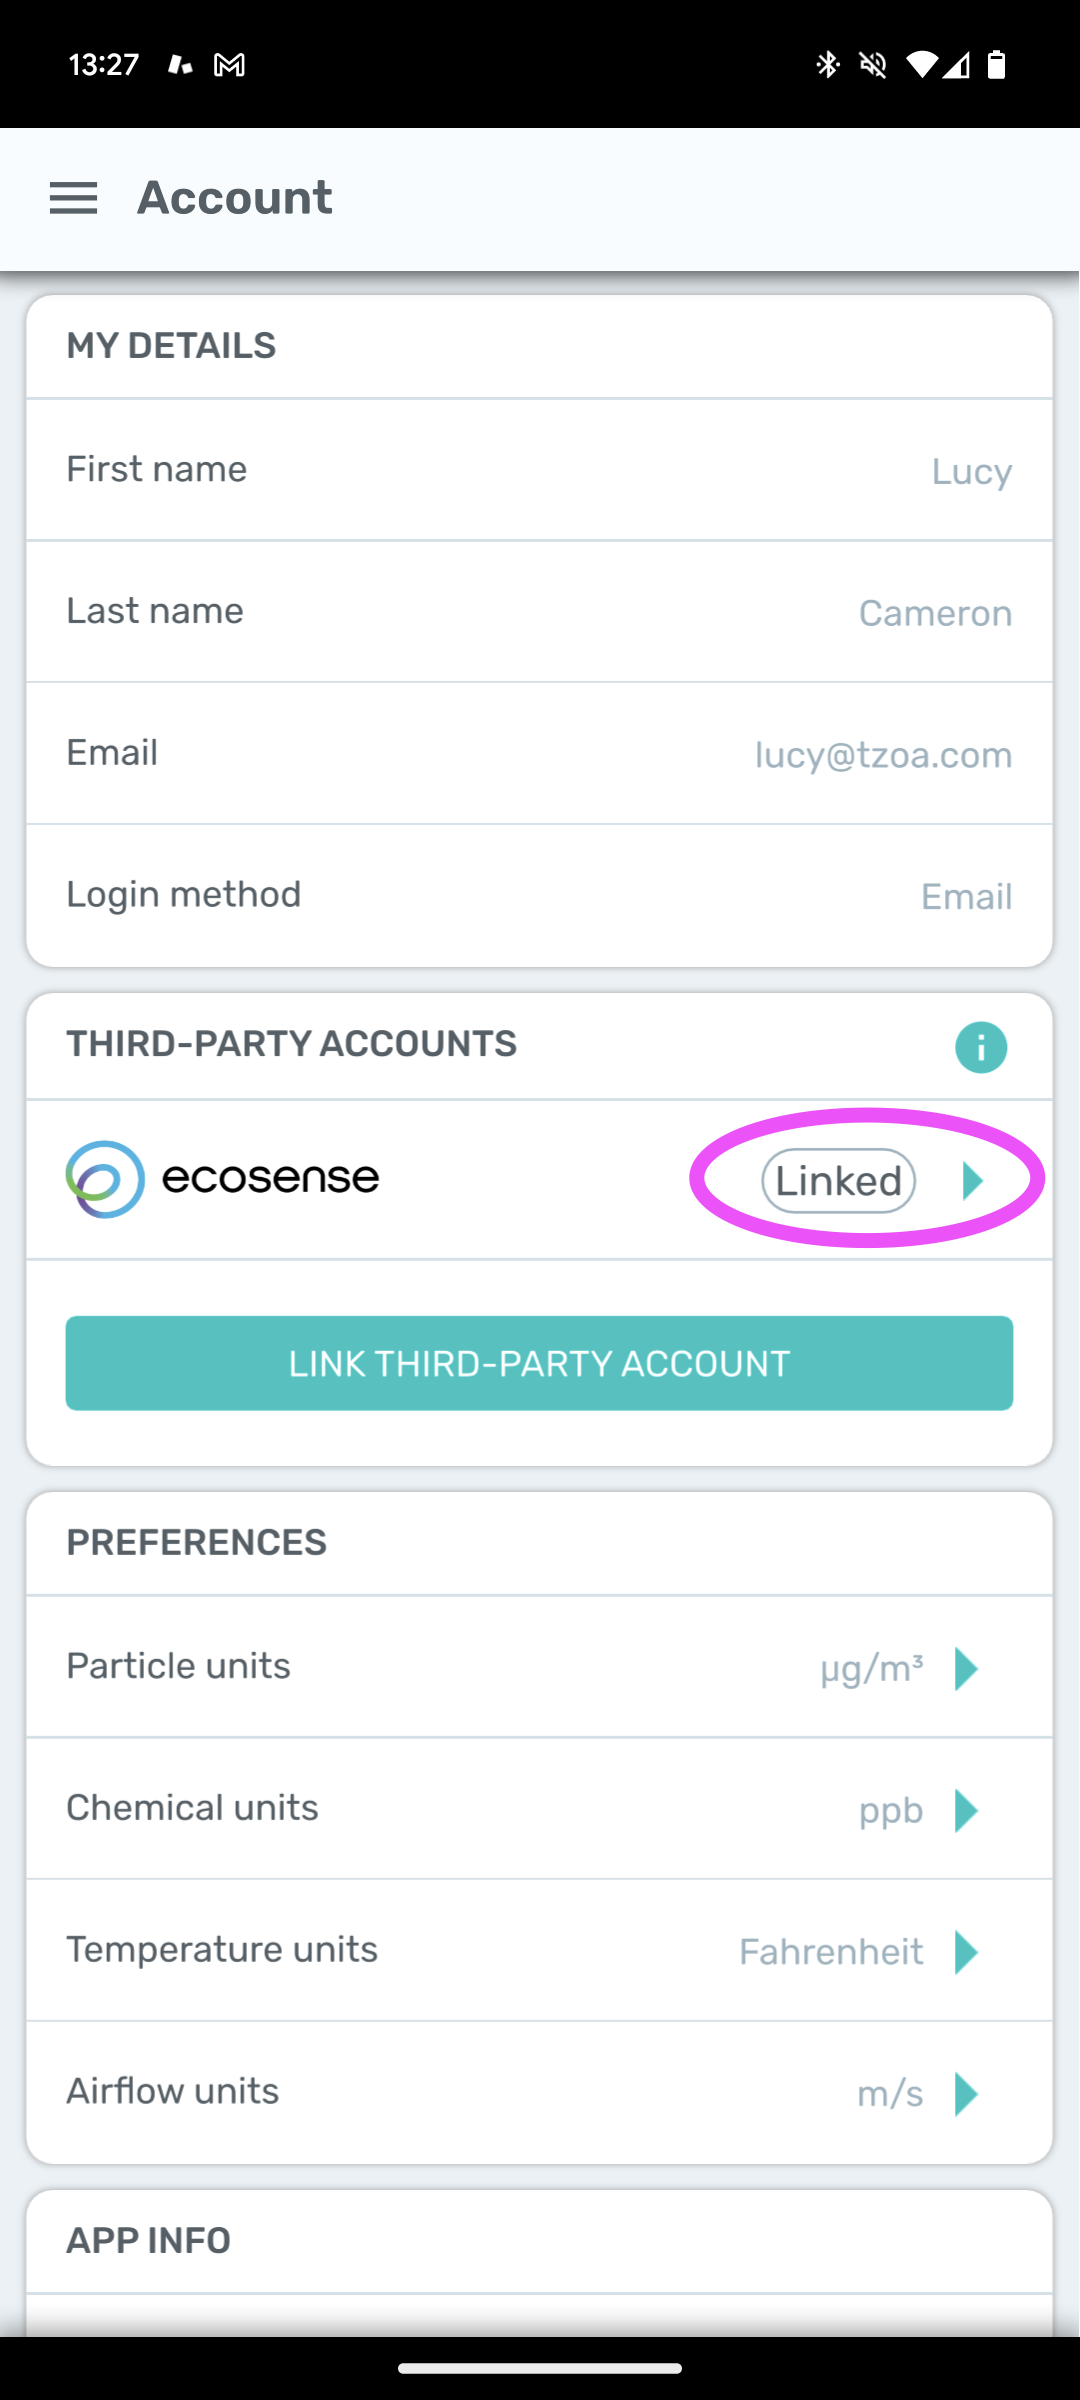 HAVEN-App_Ecosense-linked.png